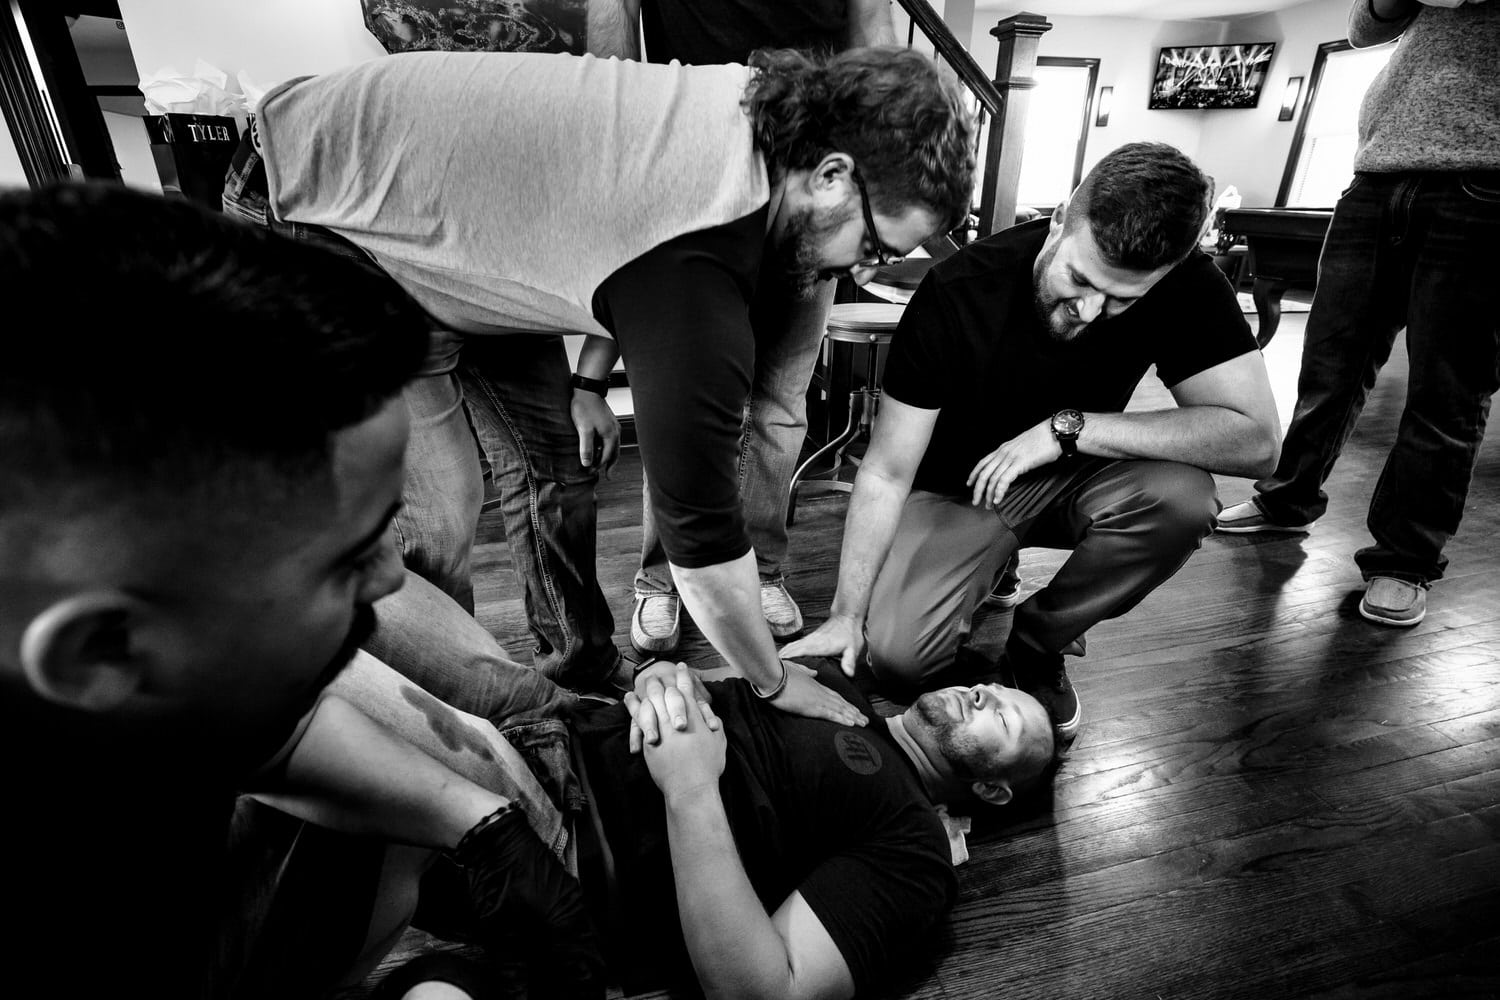 A candid black and white picture of a man lying on the floor, passed out, as his friends check on him. 